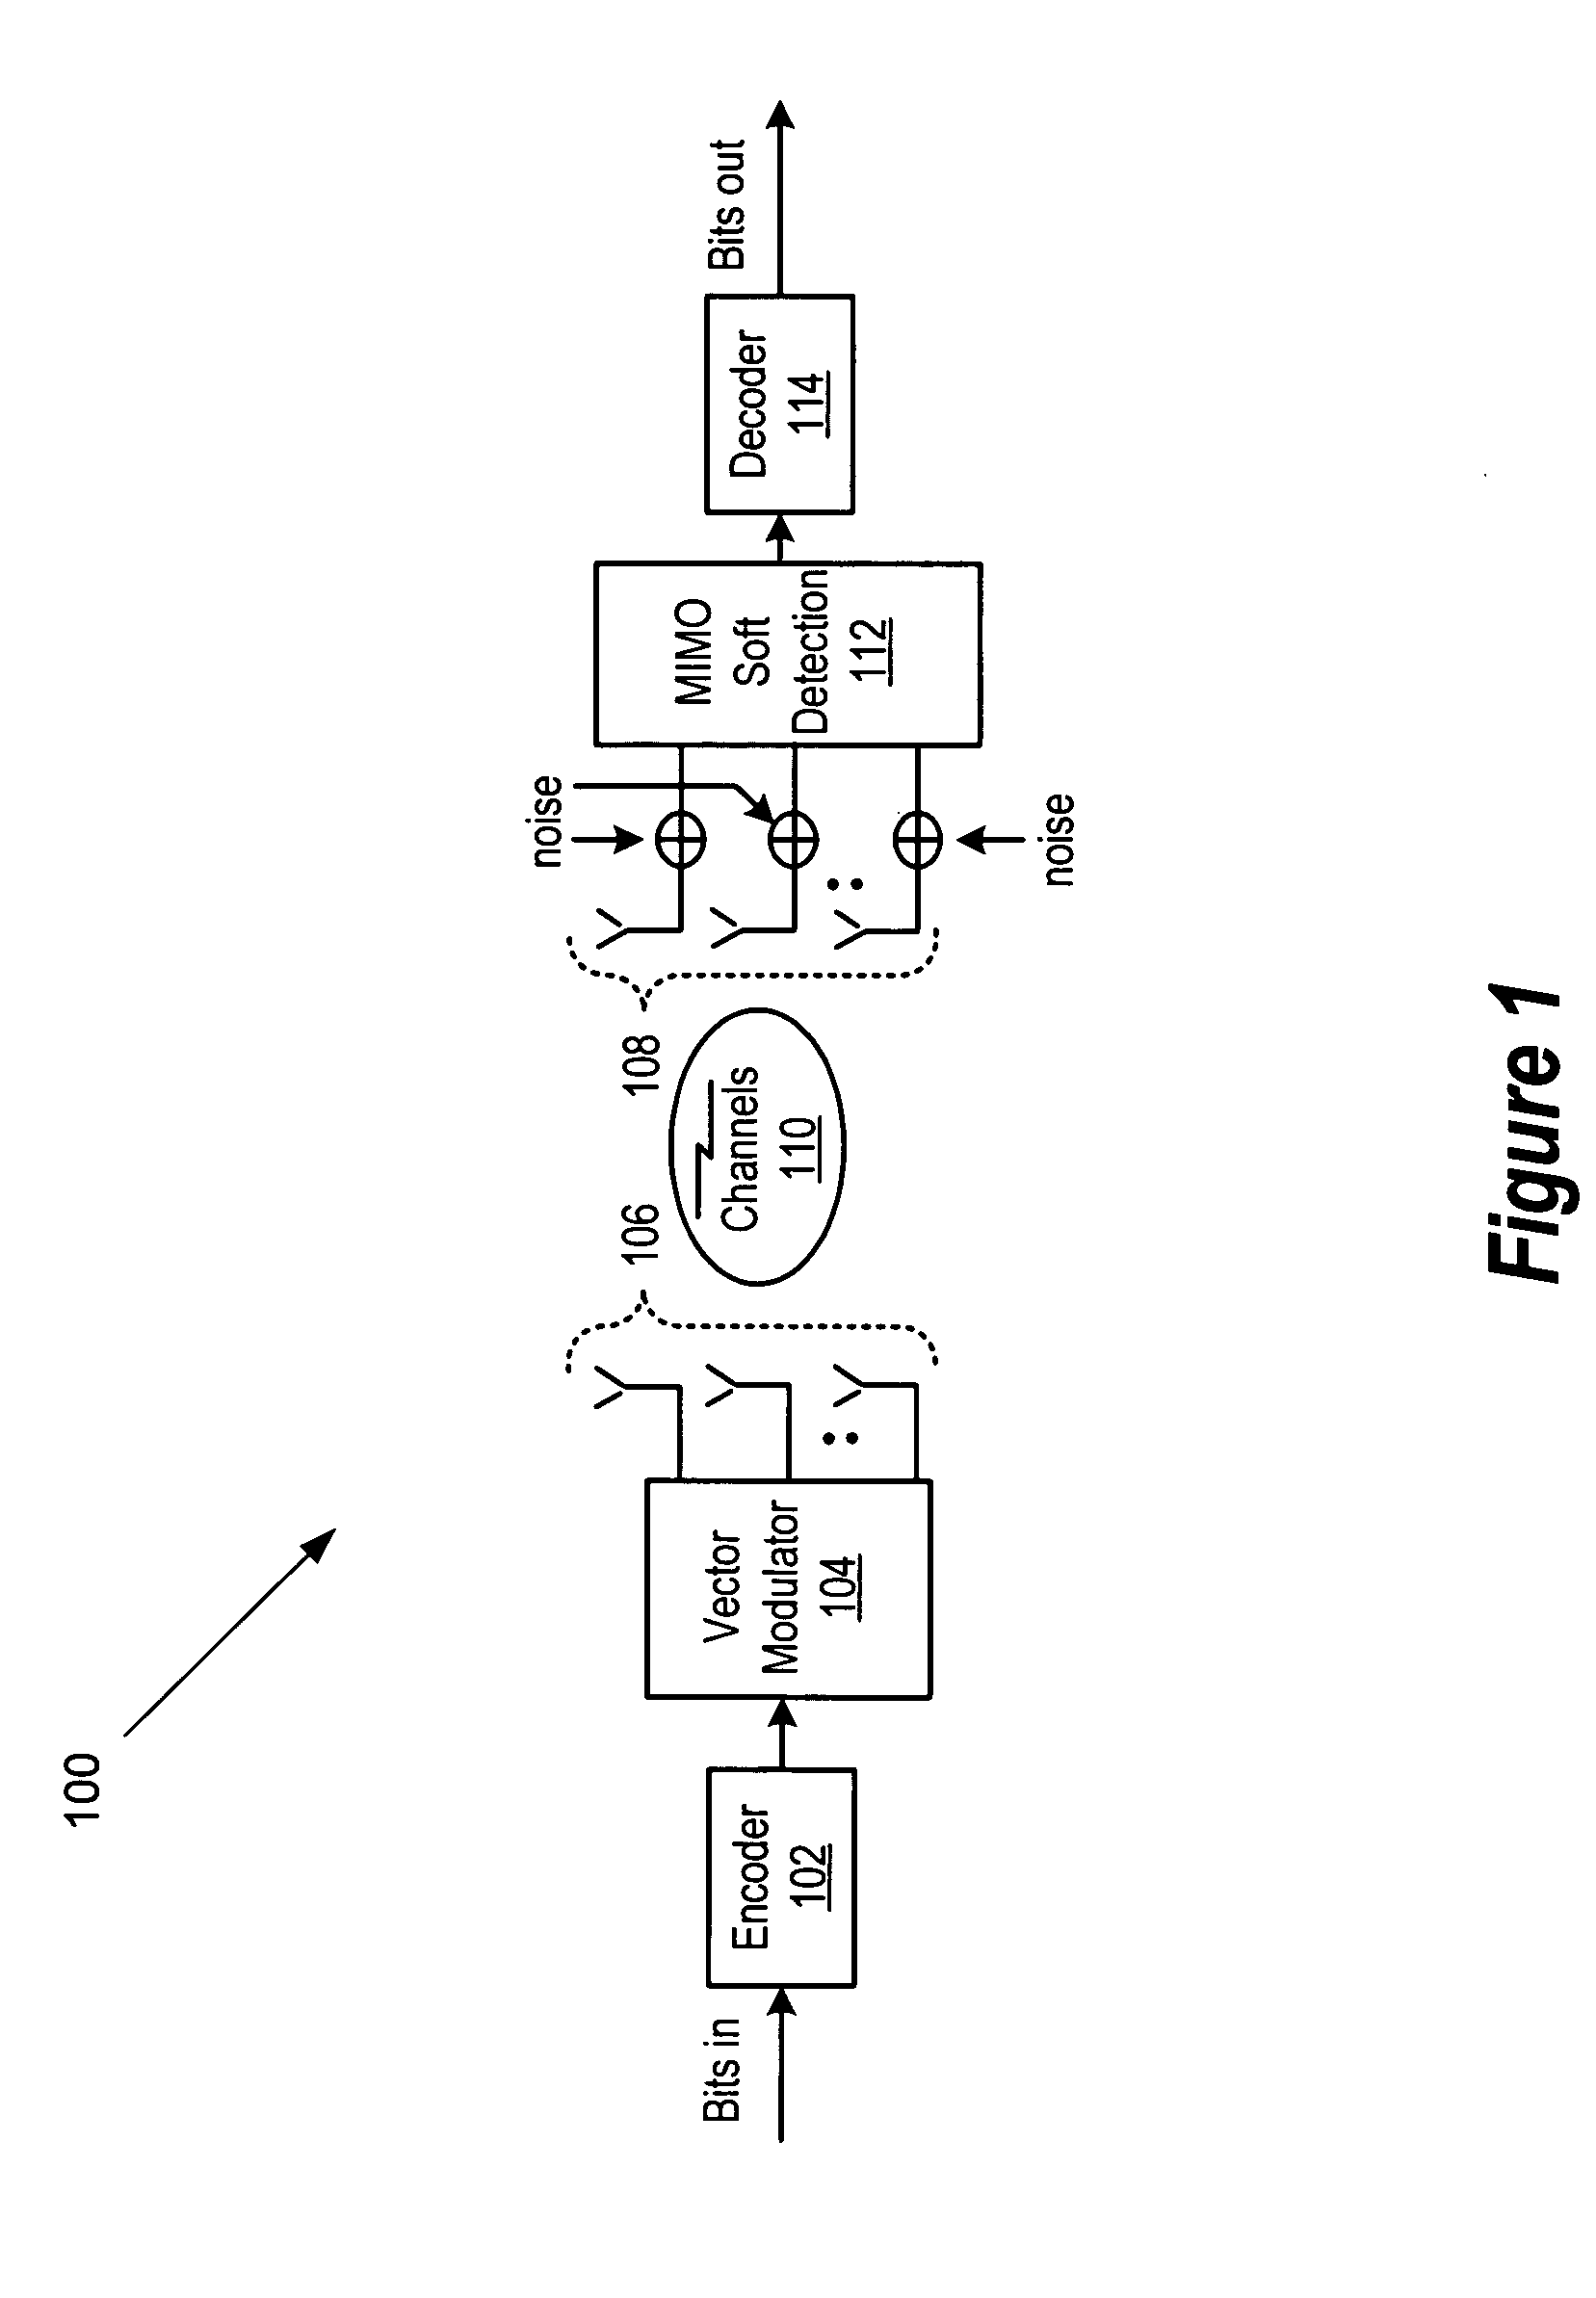 Adaptive detector for multiple-data-path systems